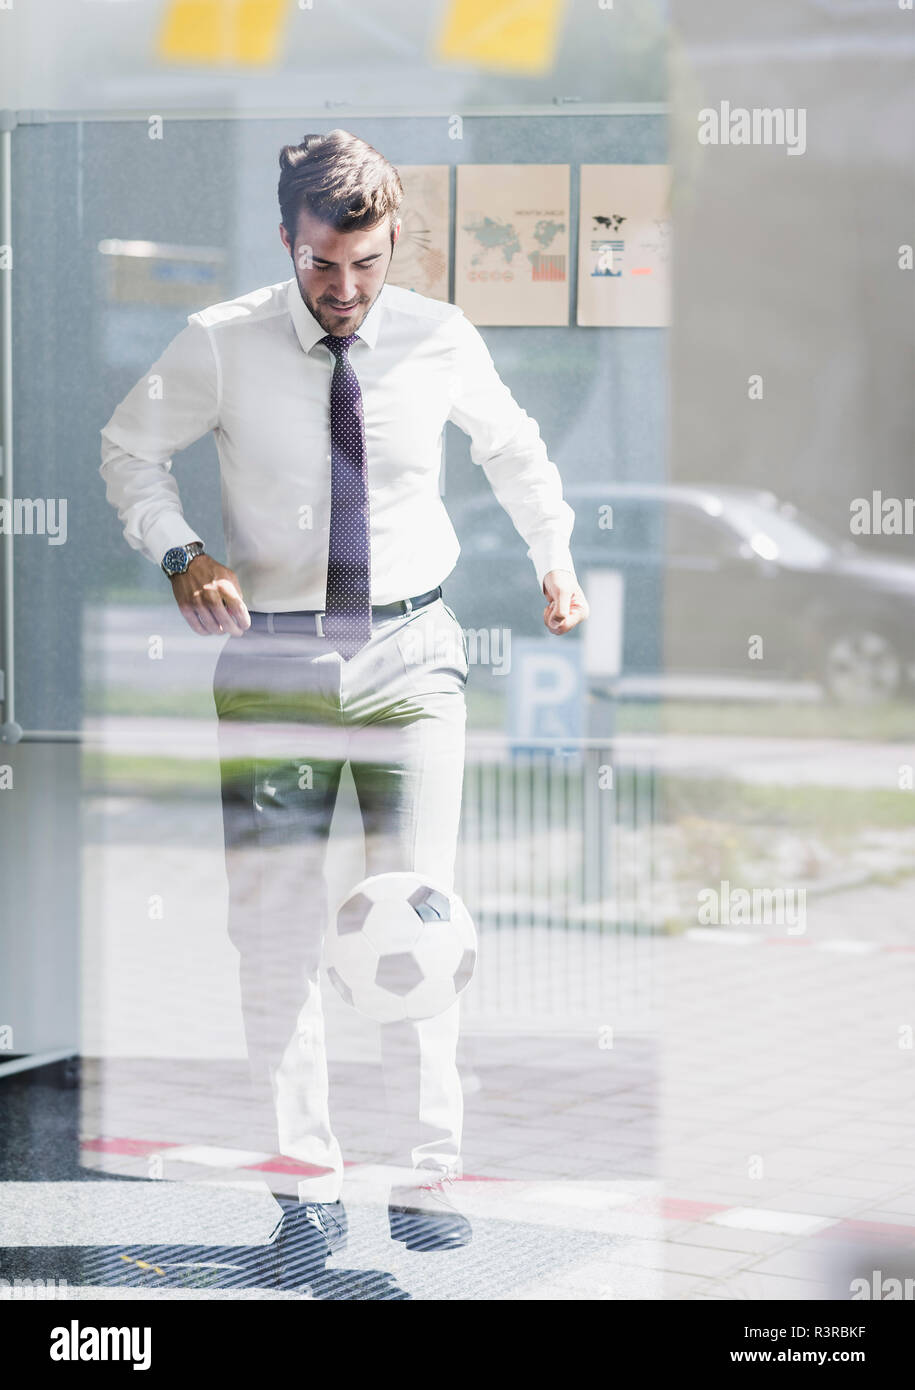 Businessman playing football in office Banque D'Images